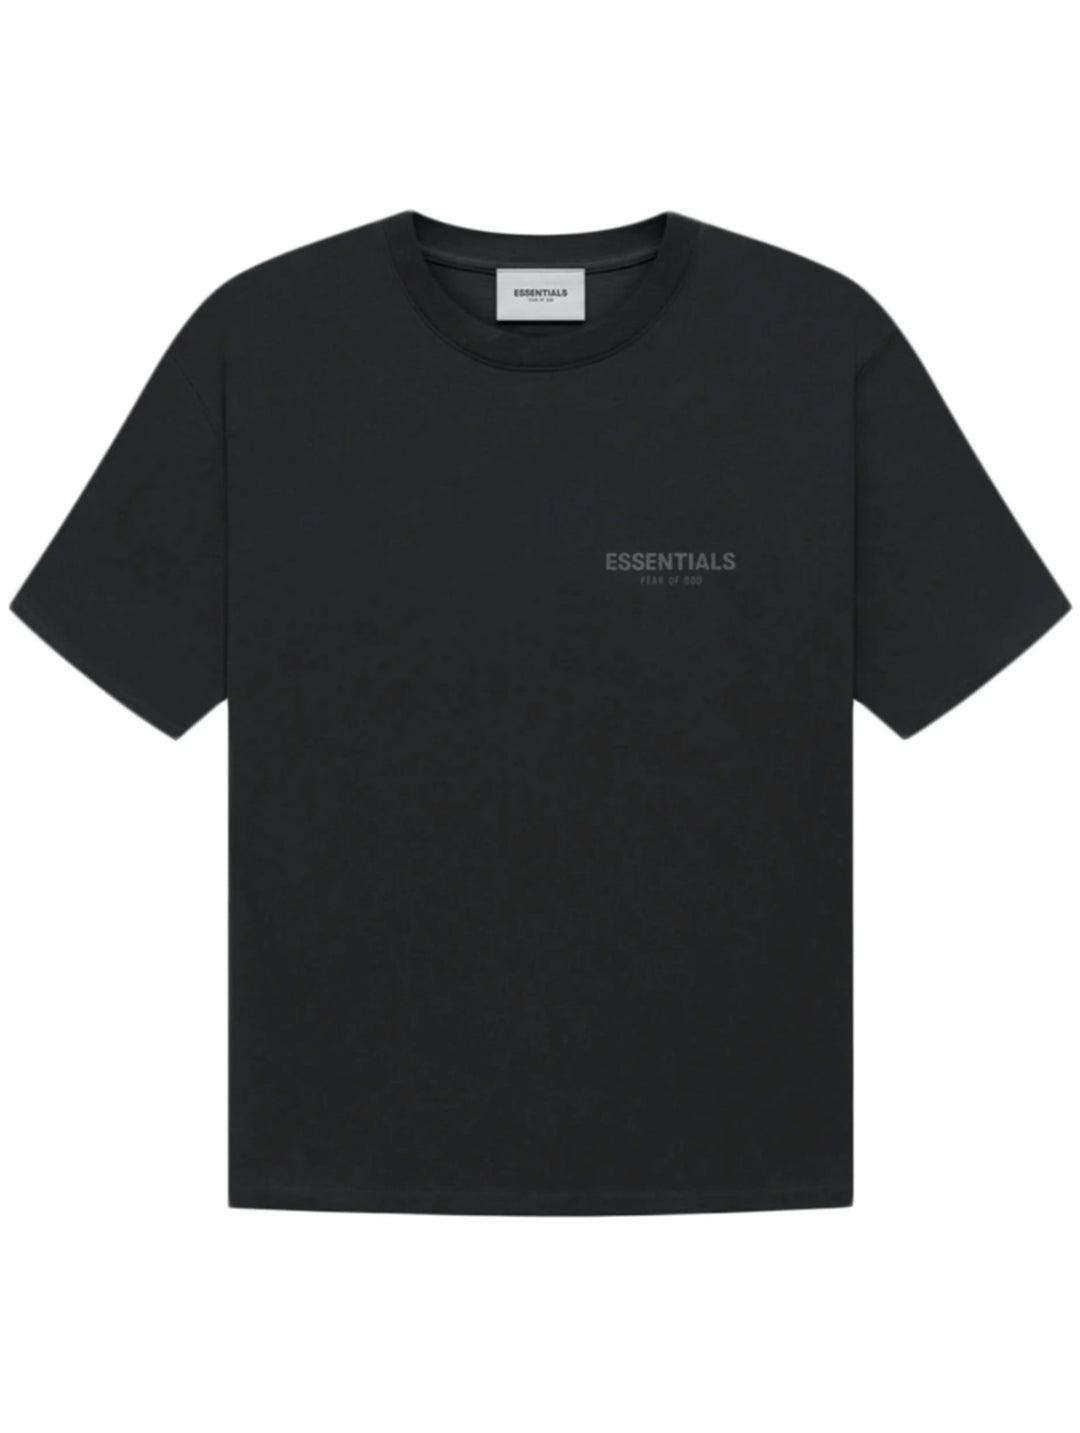 Fear of God Essentials Core Collection T-shirt Black [FW21] Prior